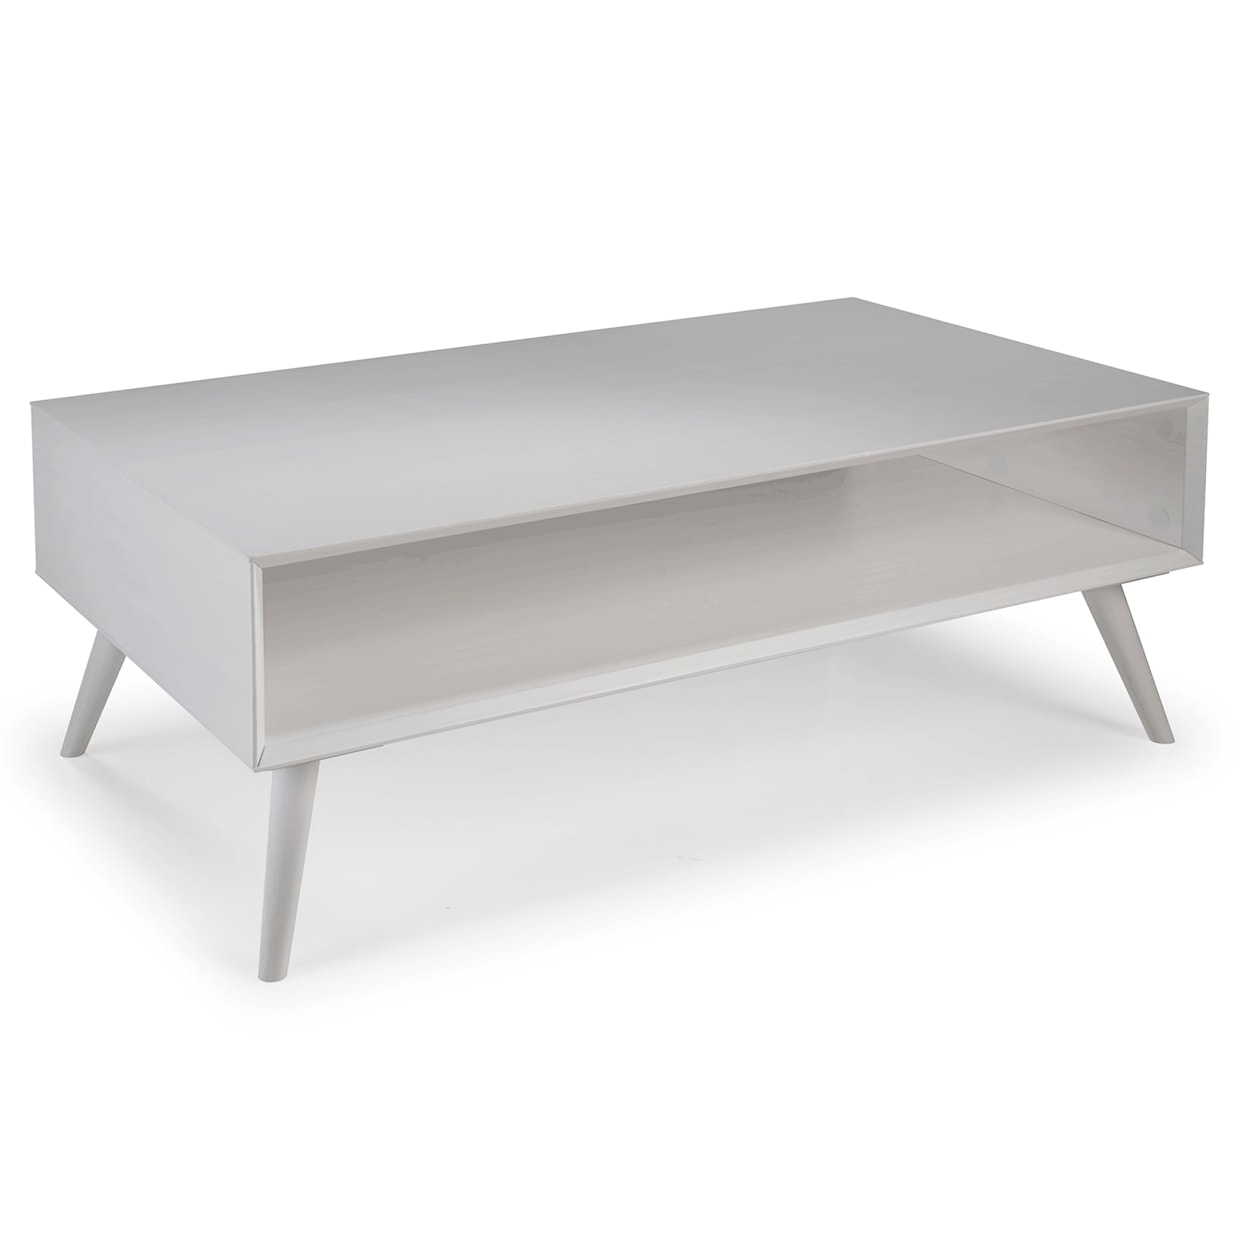 Steve Silver Elin Cocktail Table with Open Shelving